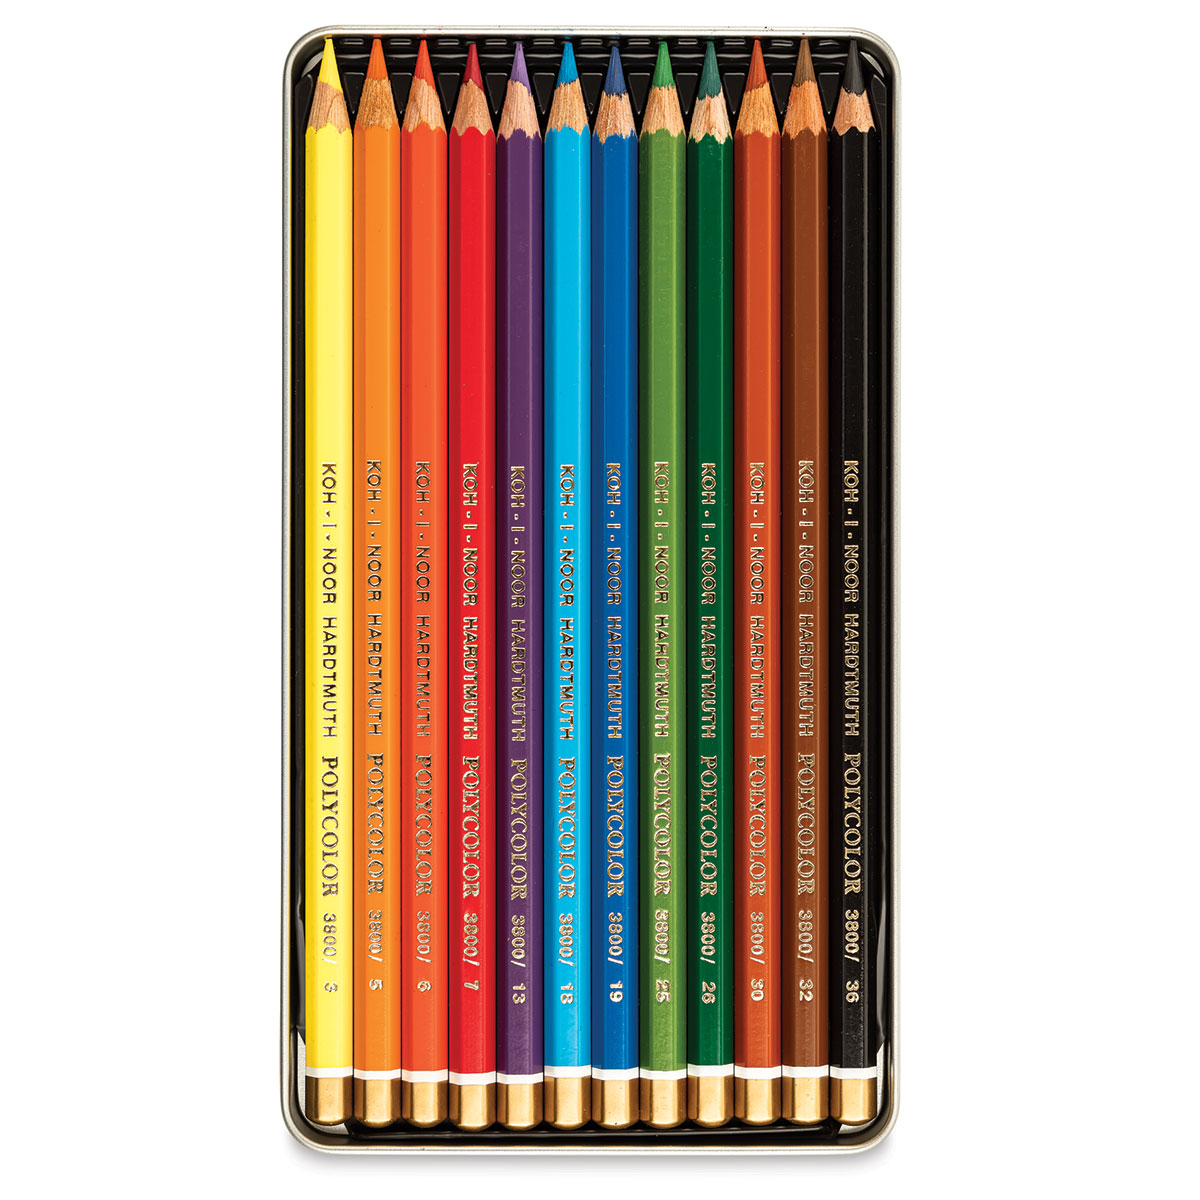 KOH-I-NOOR set of metallic markers gold+silver - Live in Colors